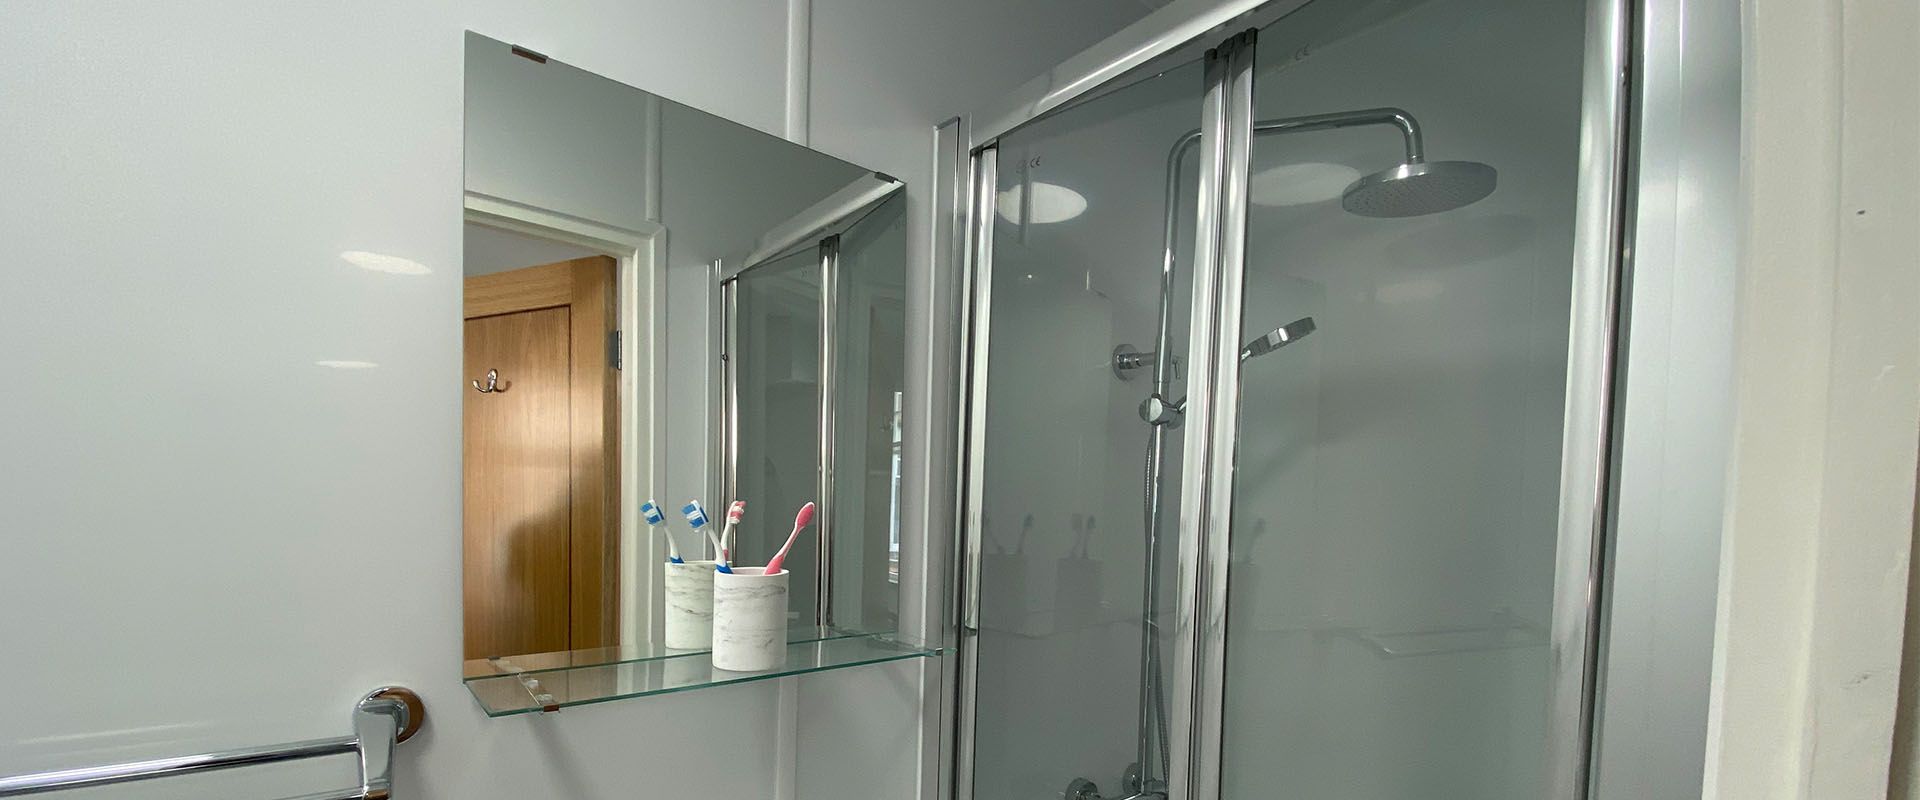 Live in luxury with our spacious ensuites with waterfall showers